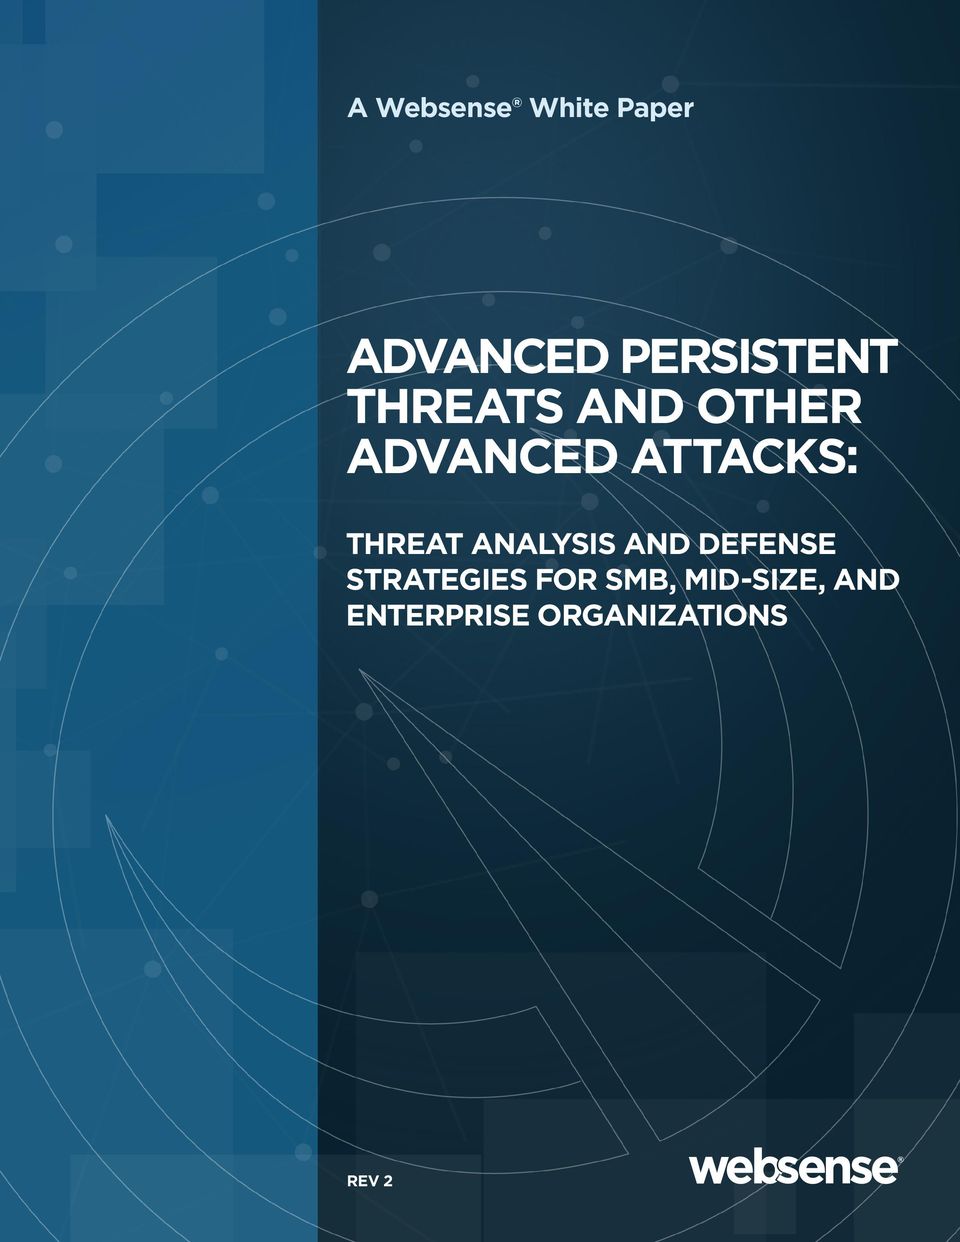 ANALYSIS AND DEFENSE STRATEGIES FOR SMB,